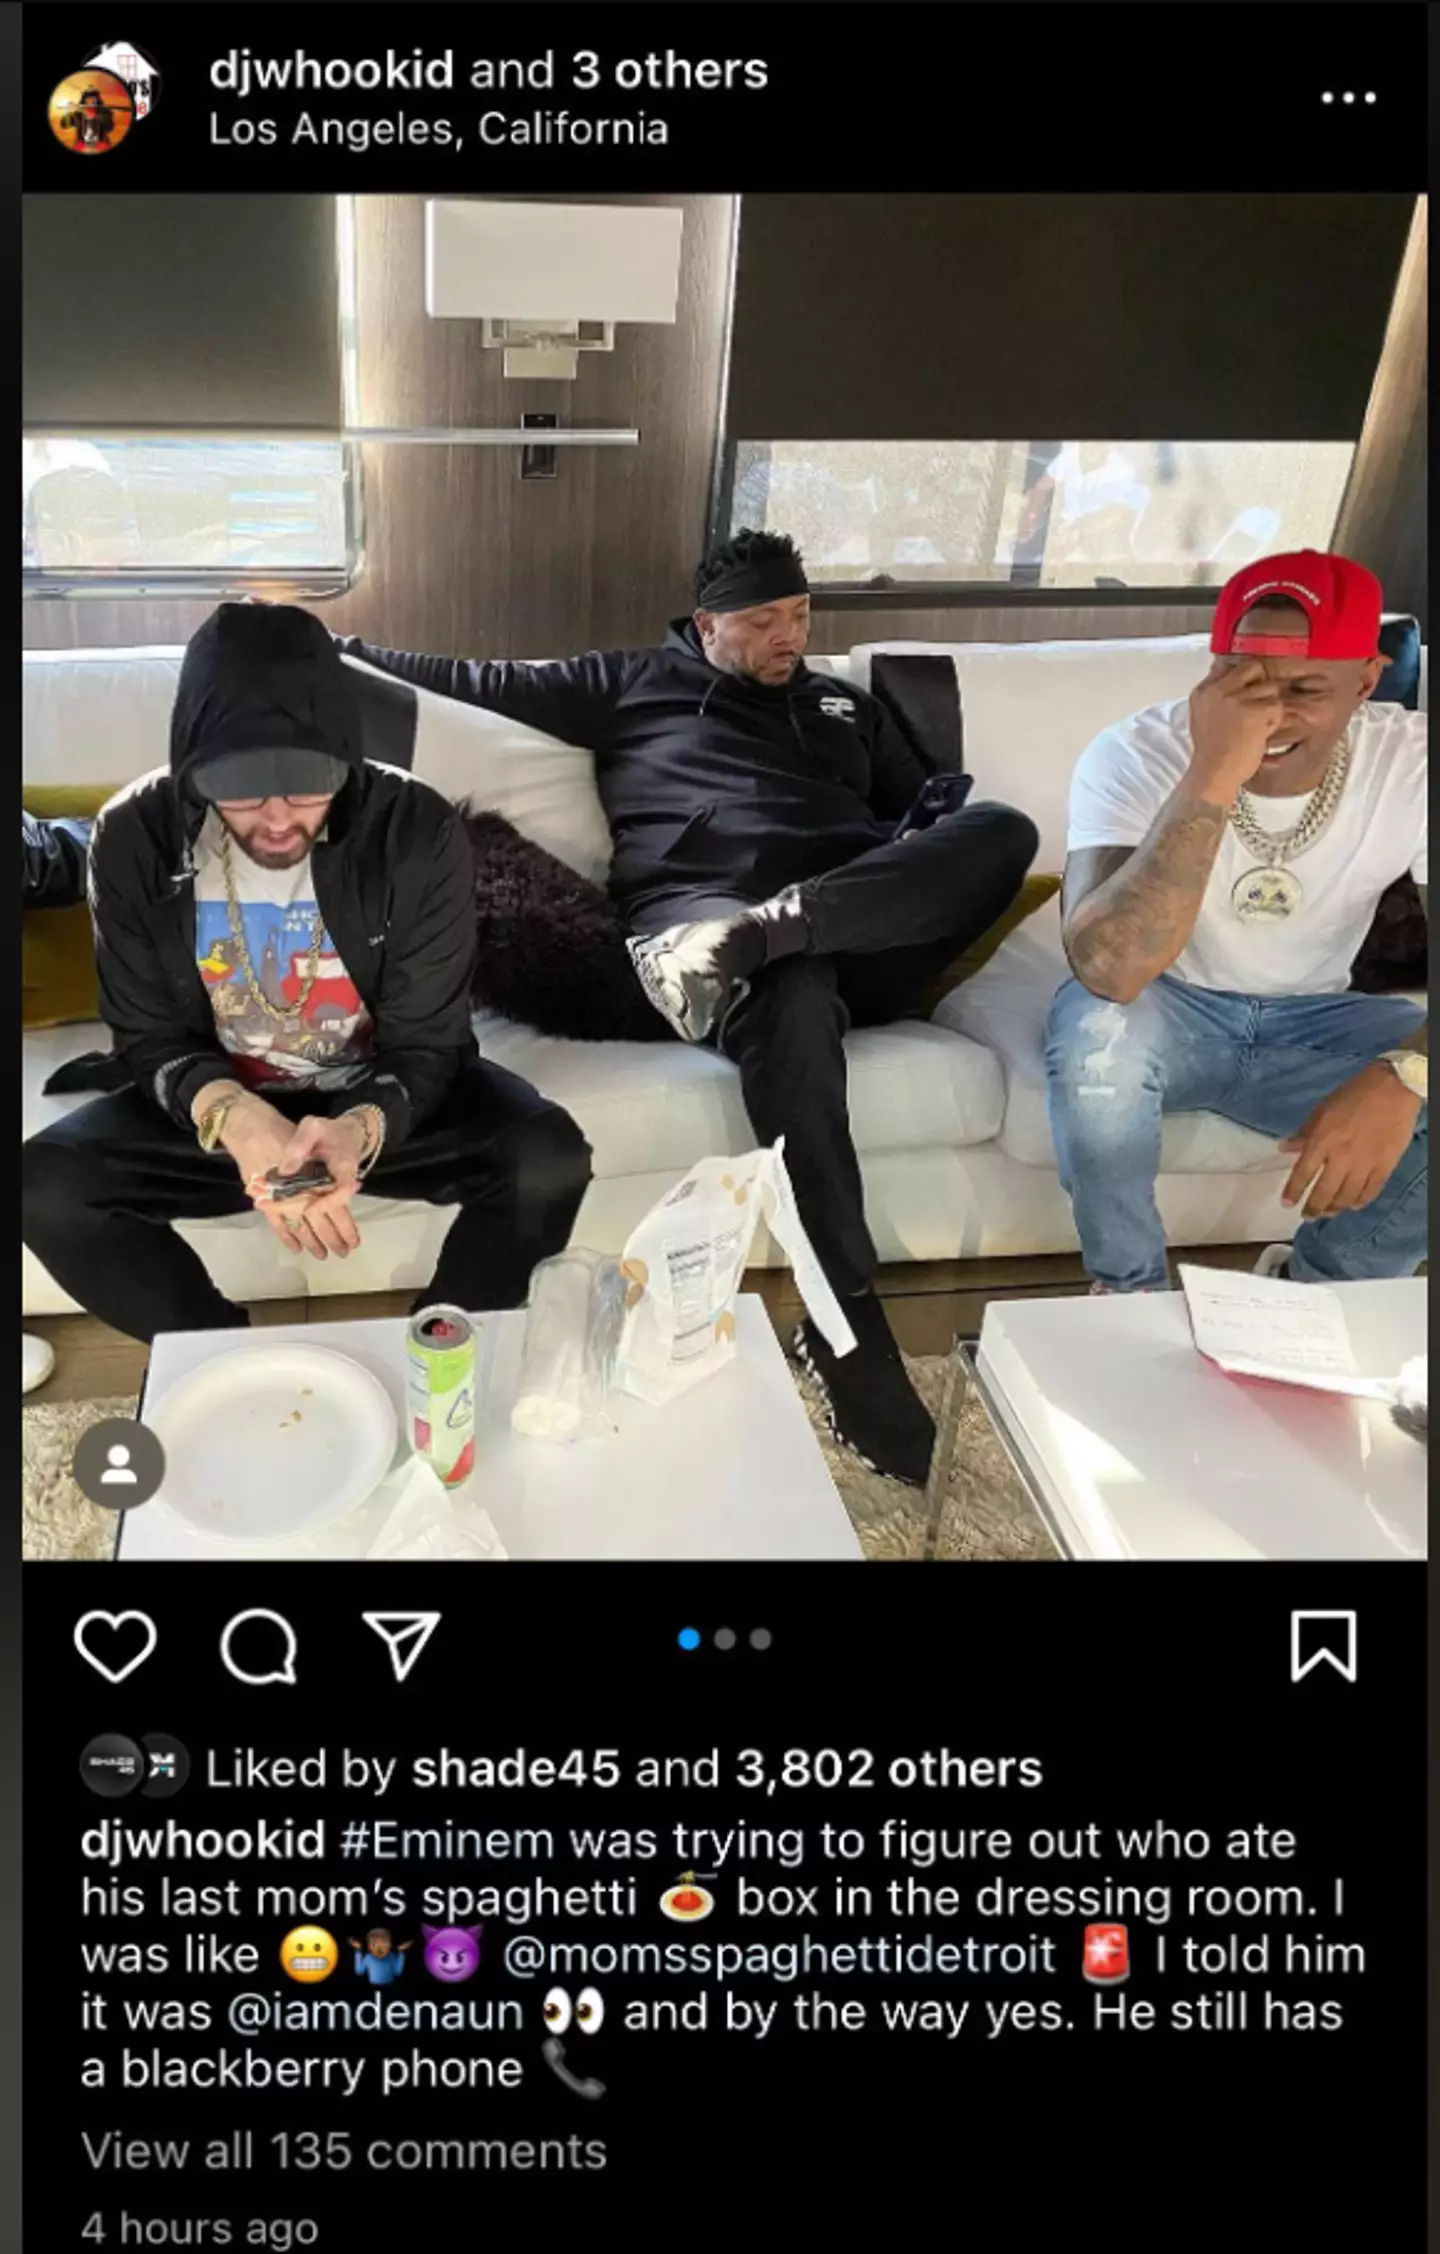 The rapper was snapped on DJWhooKid's instagram.